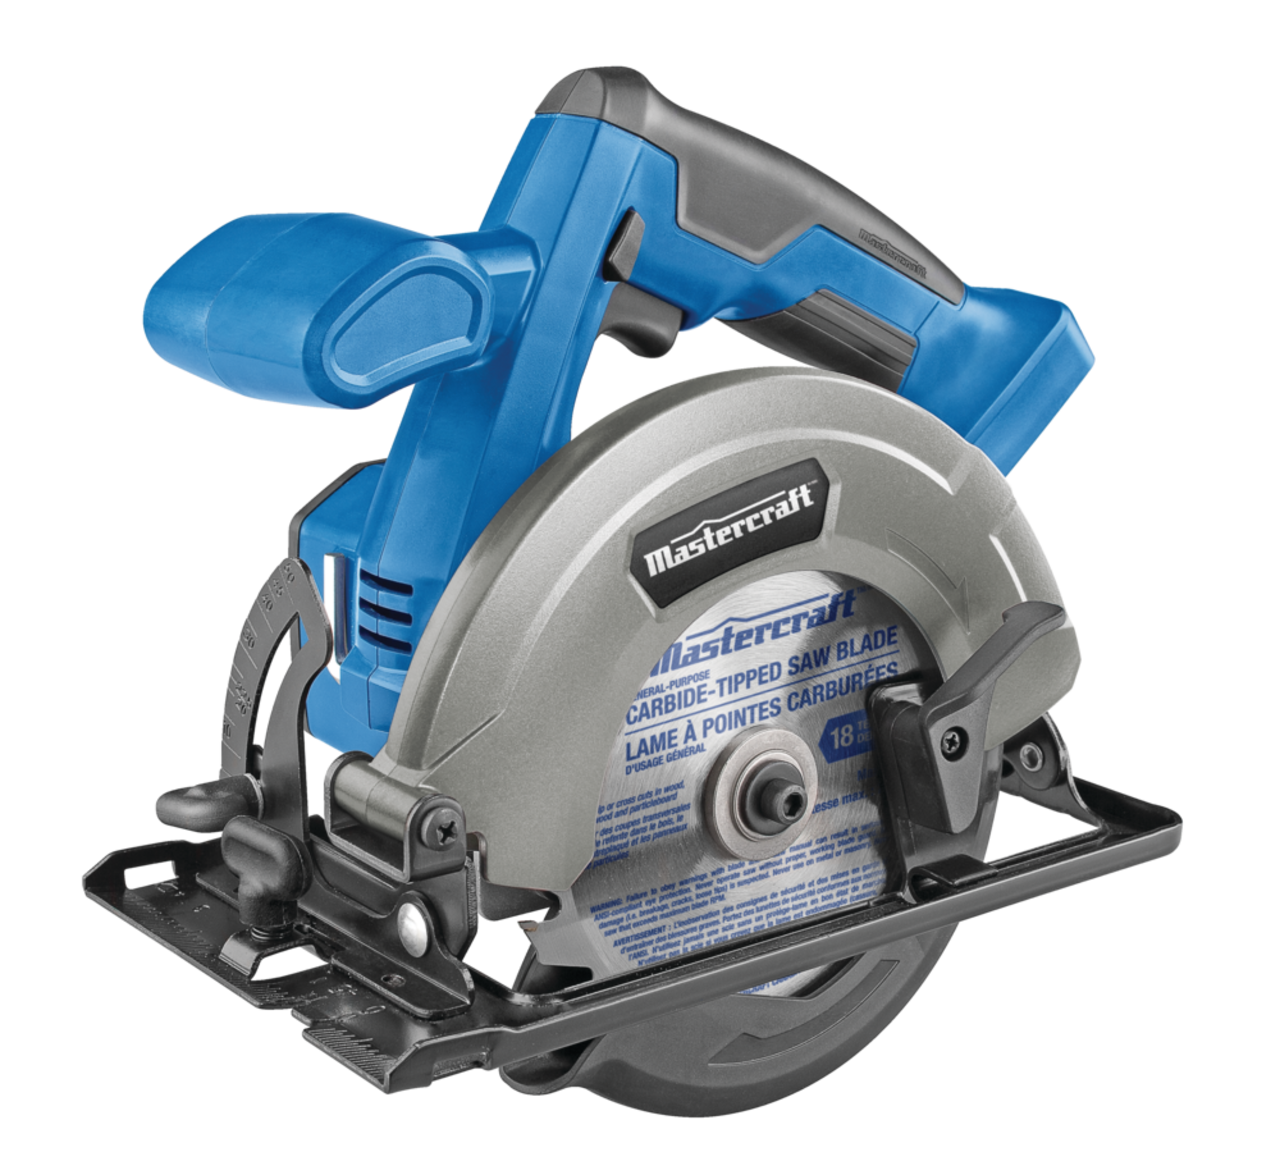 https://media-www.canadiantire.ca/product/fixing/tools/portable-power-tools/0548332/mastercraft-20vmax-5-1-2-circular-saw-bare-tool-f70f5ddc-5155-4274-b619-94ac45badacd.png?imdensity=1&imwidth=640&impolicy=mZoom